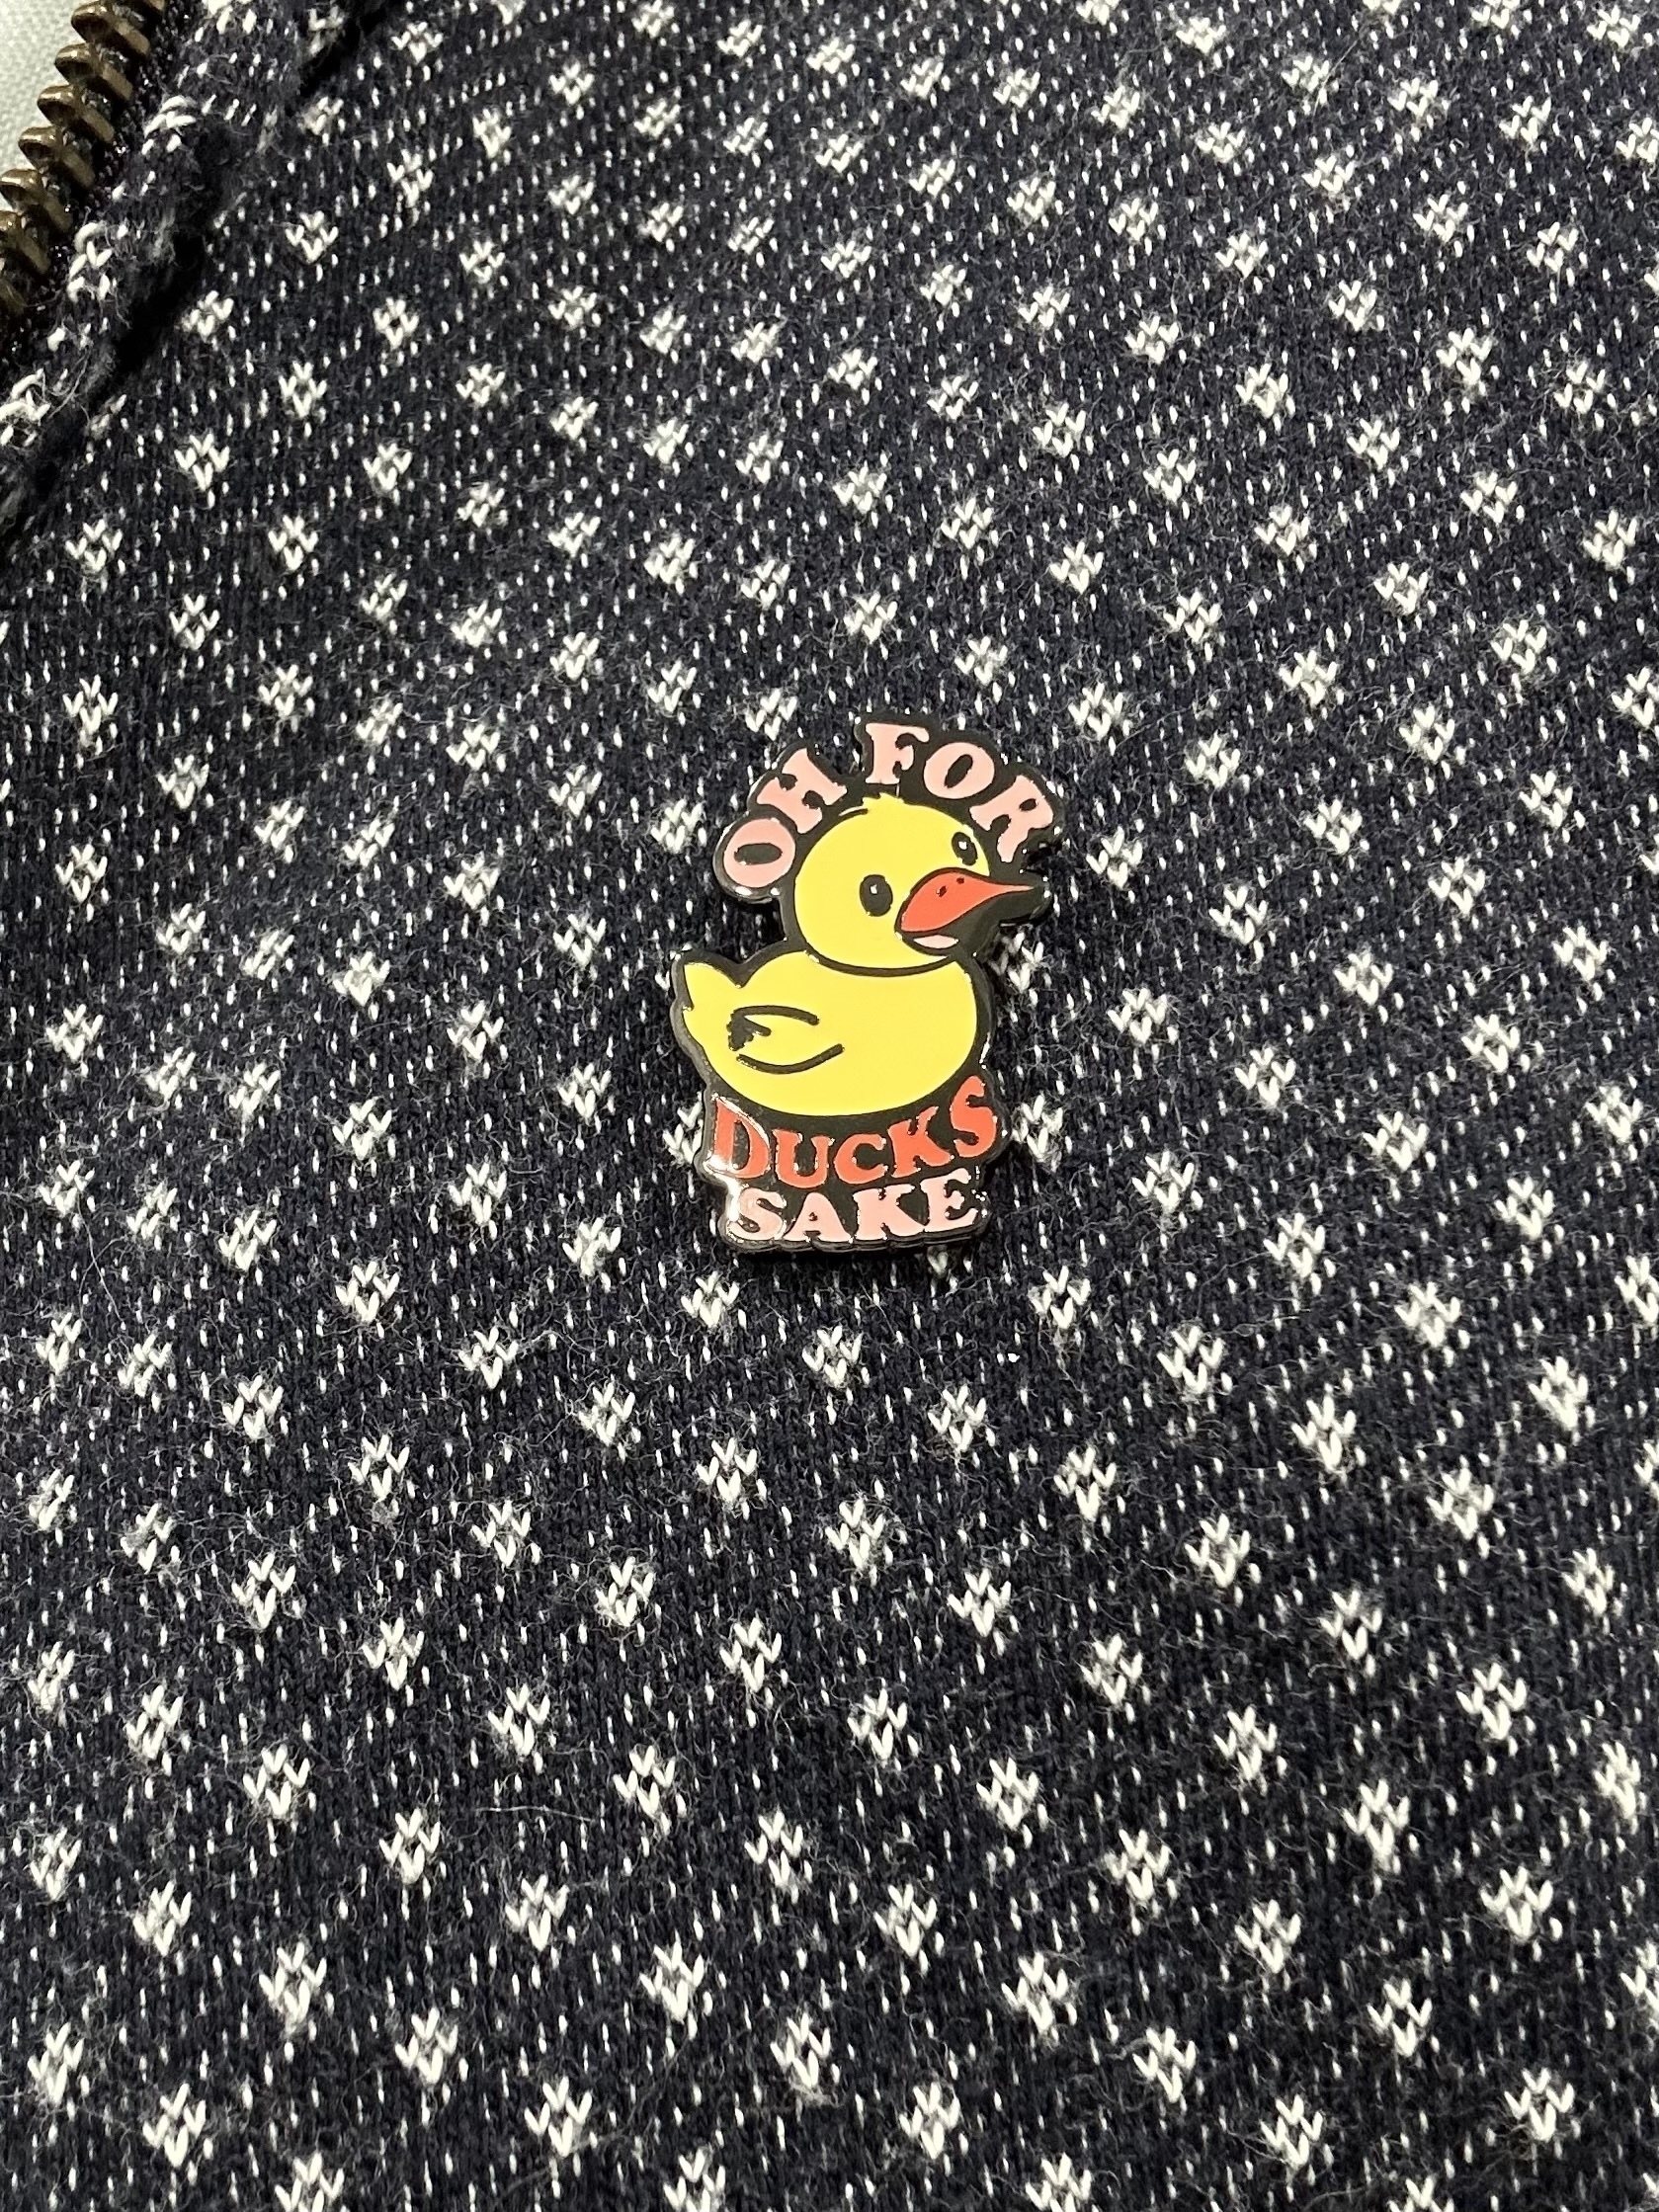 An enamel badge in the shape of a yellow duck with “Oh for ducks sake” around it.